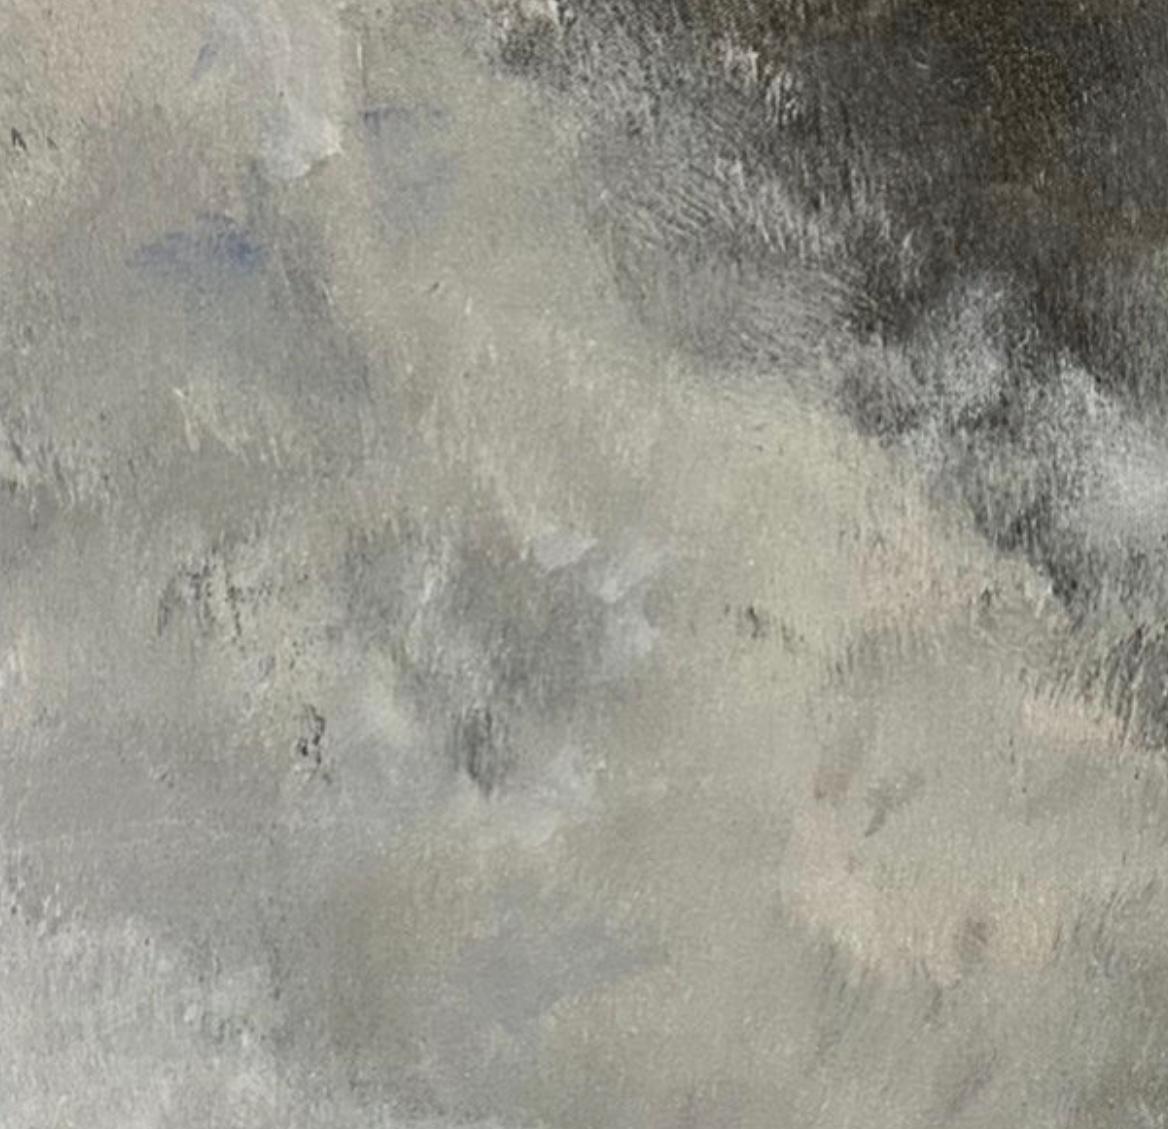 Some simple dirt, neutral landscape, 2021, Acrylic on canvas - Abstract Impressionist Painting by Juanita Bellavance 